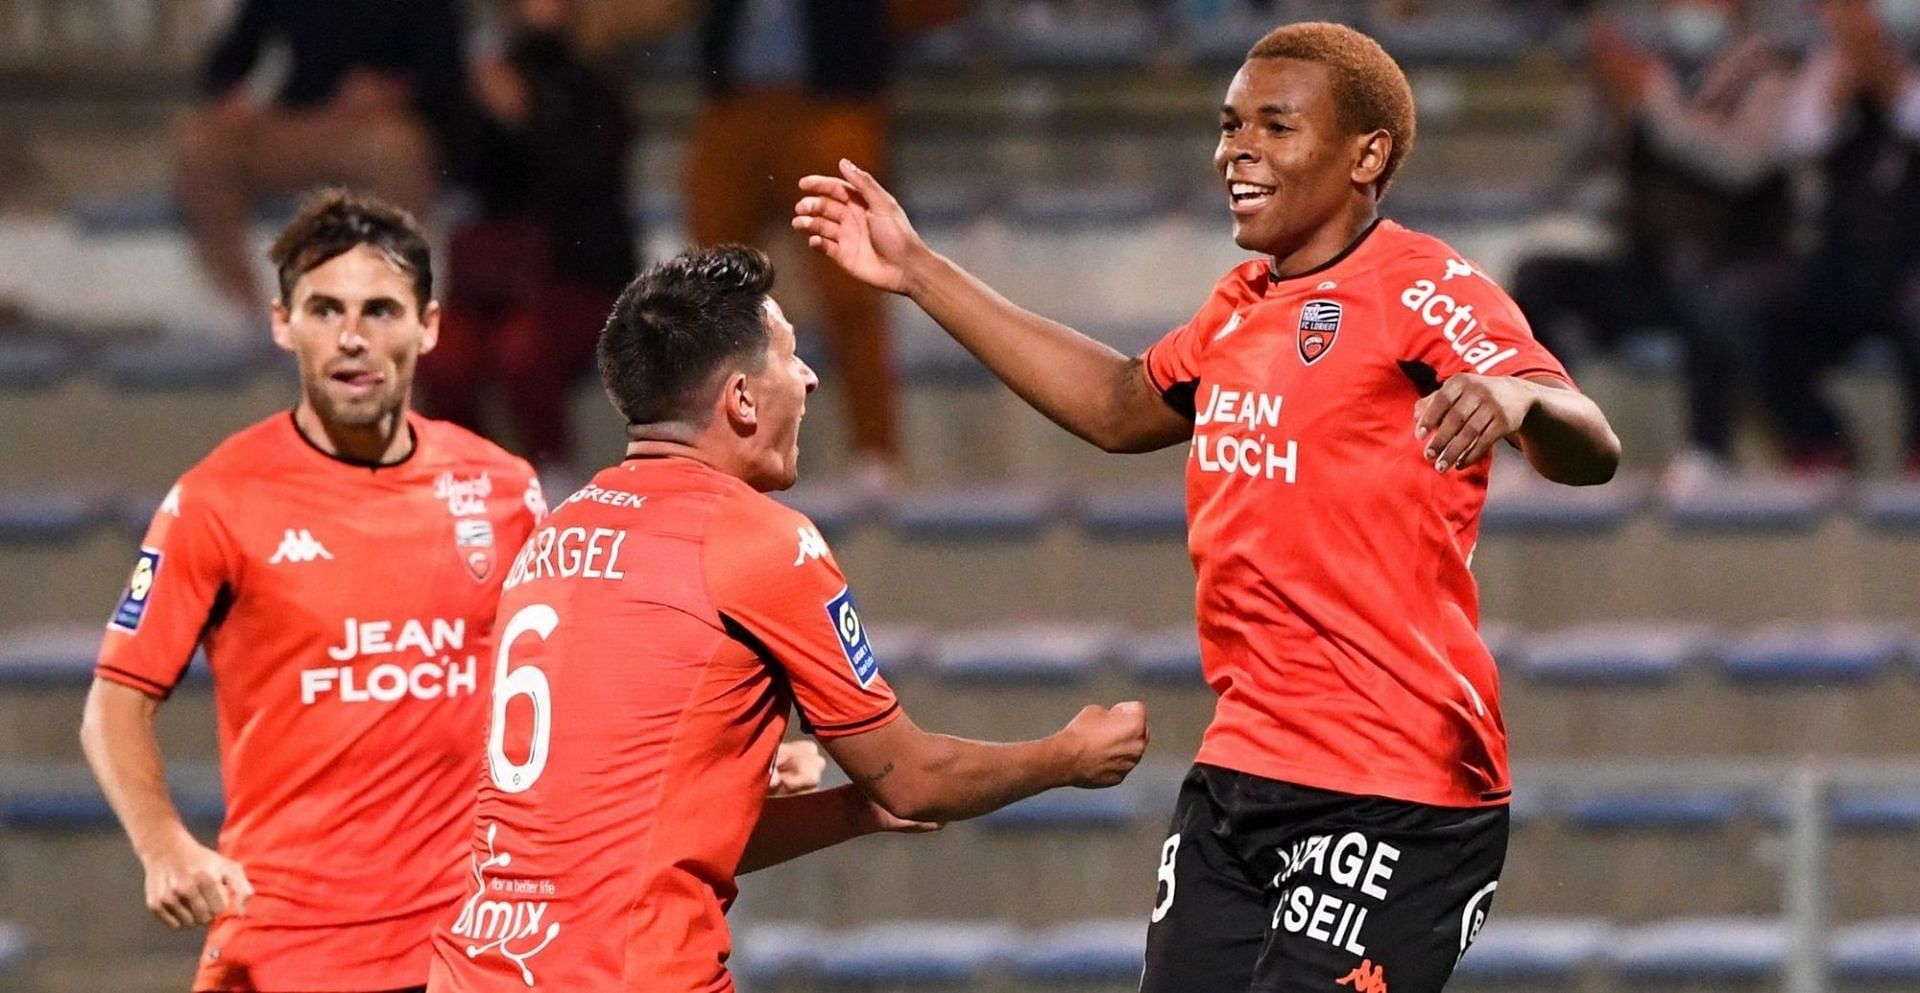 Can Lorient overcome the challenge of Strasbourg this weekend?